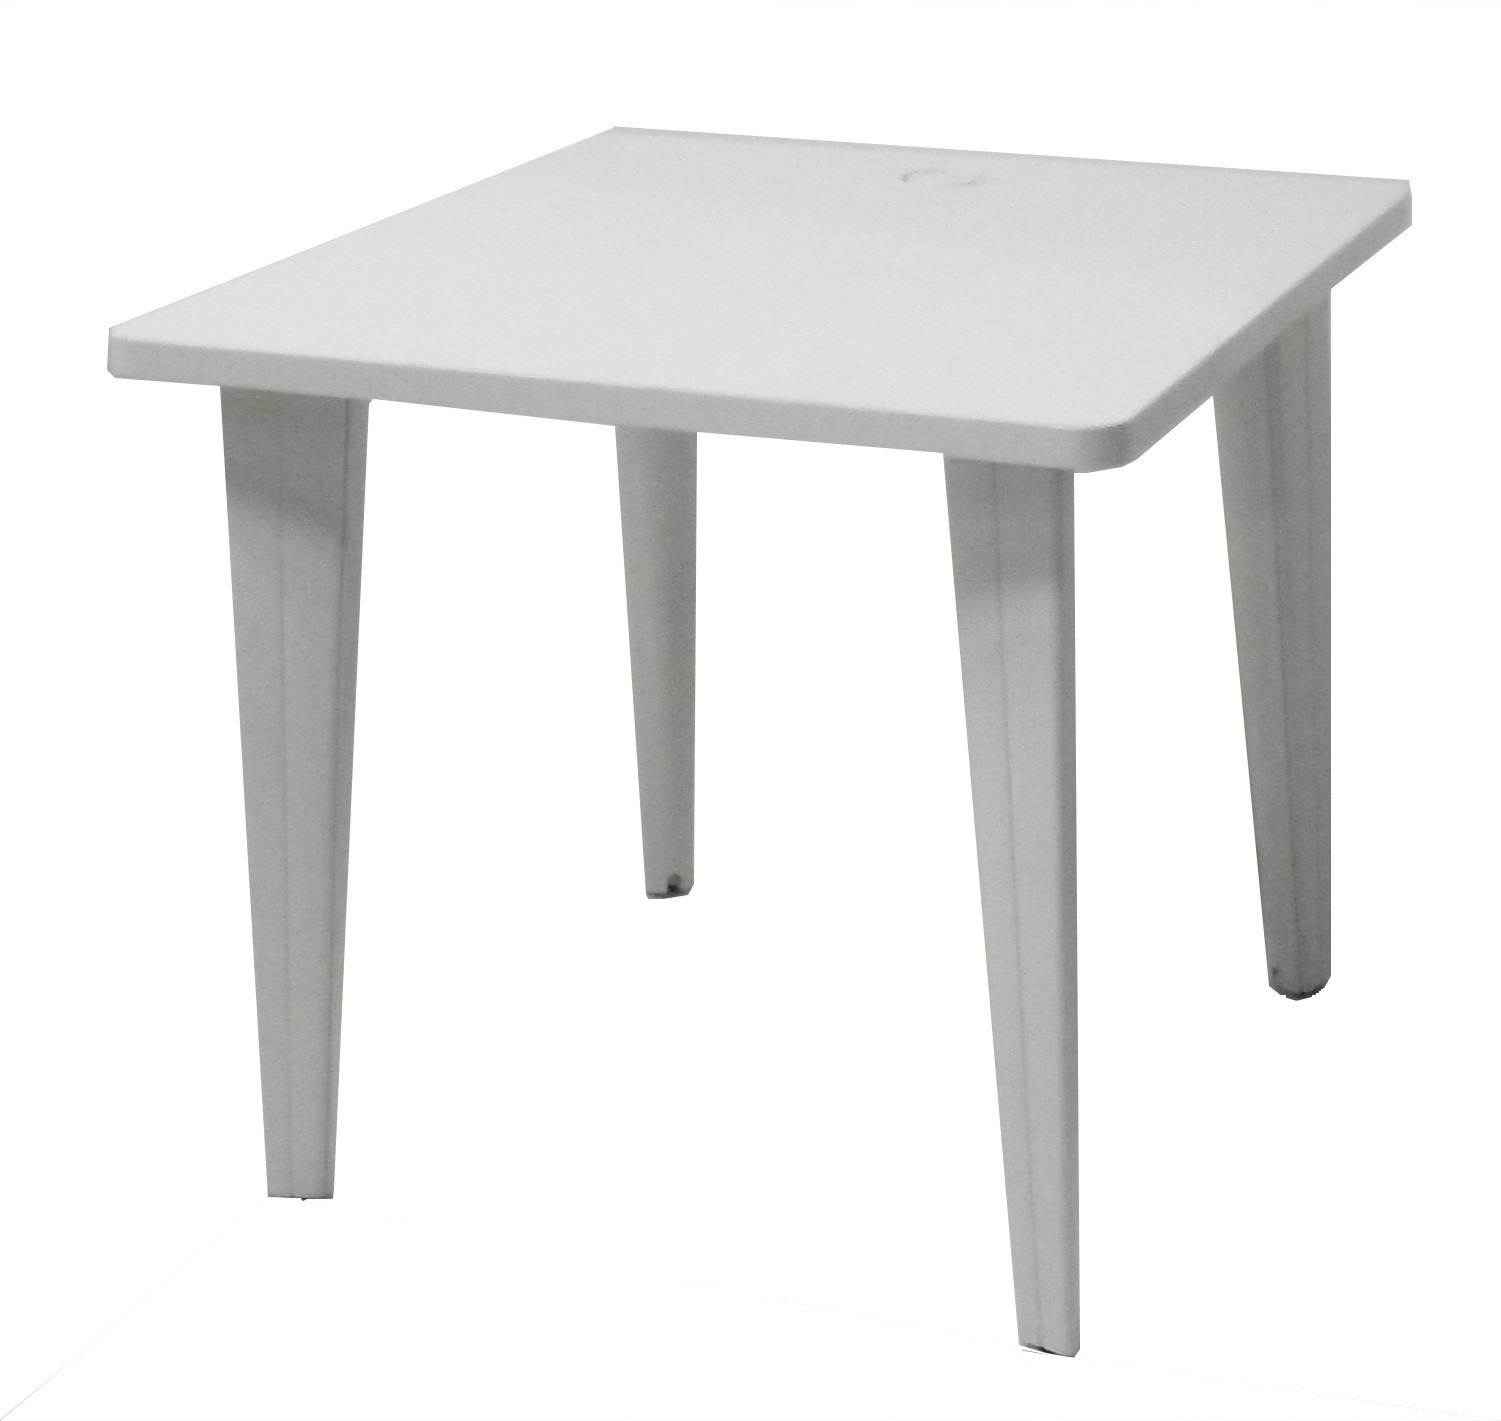 Table blanche pas cher